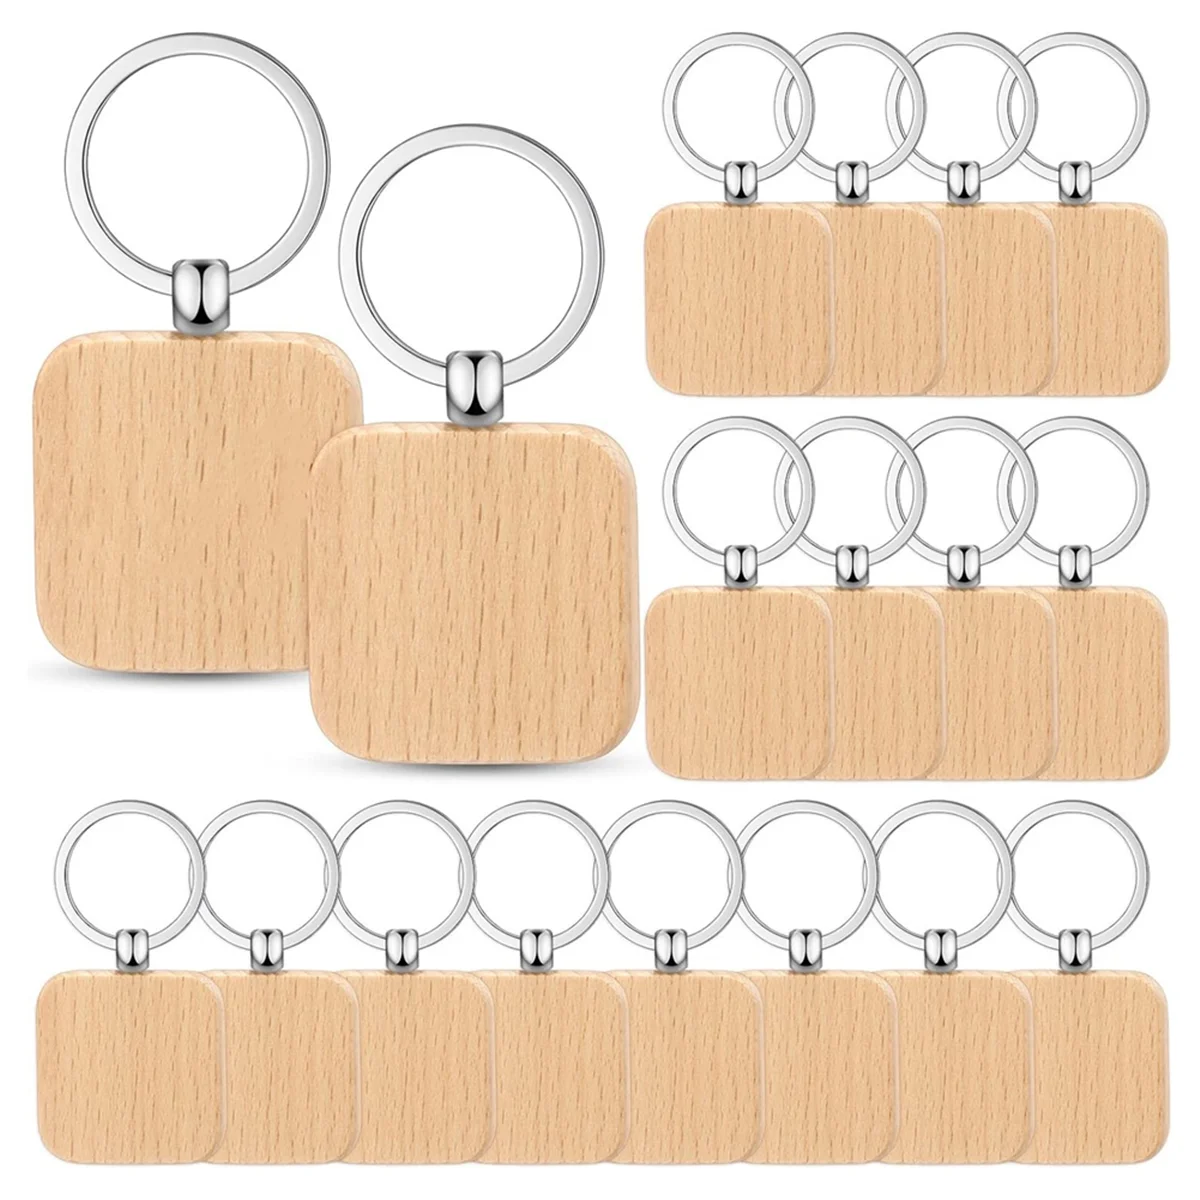 

100PCS Wooden Keychain Blanks Wood Key Chain Bulk Unfinished Wooden Engraving Key Tag Ring for DIY Gift Crafts(Square)